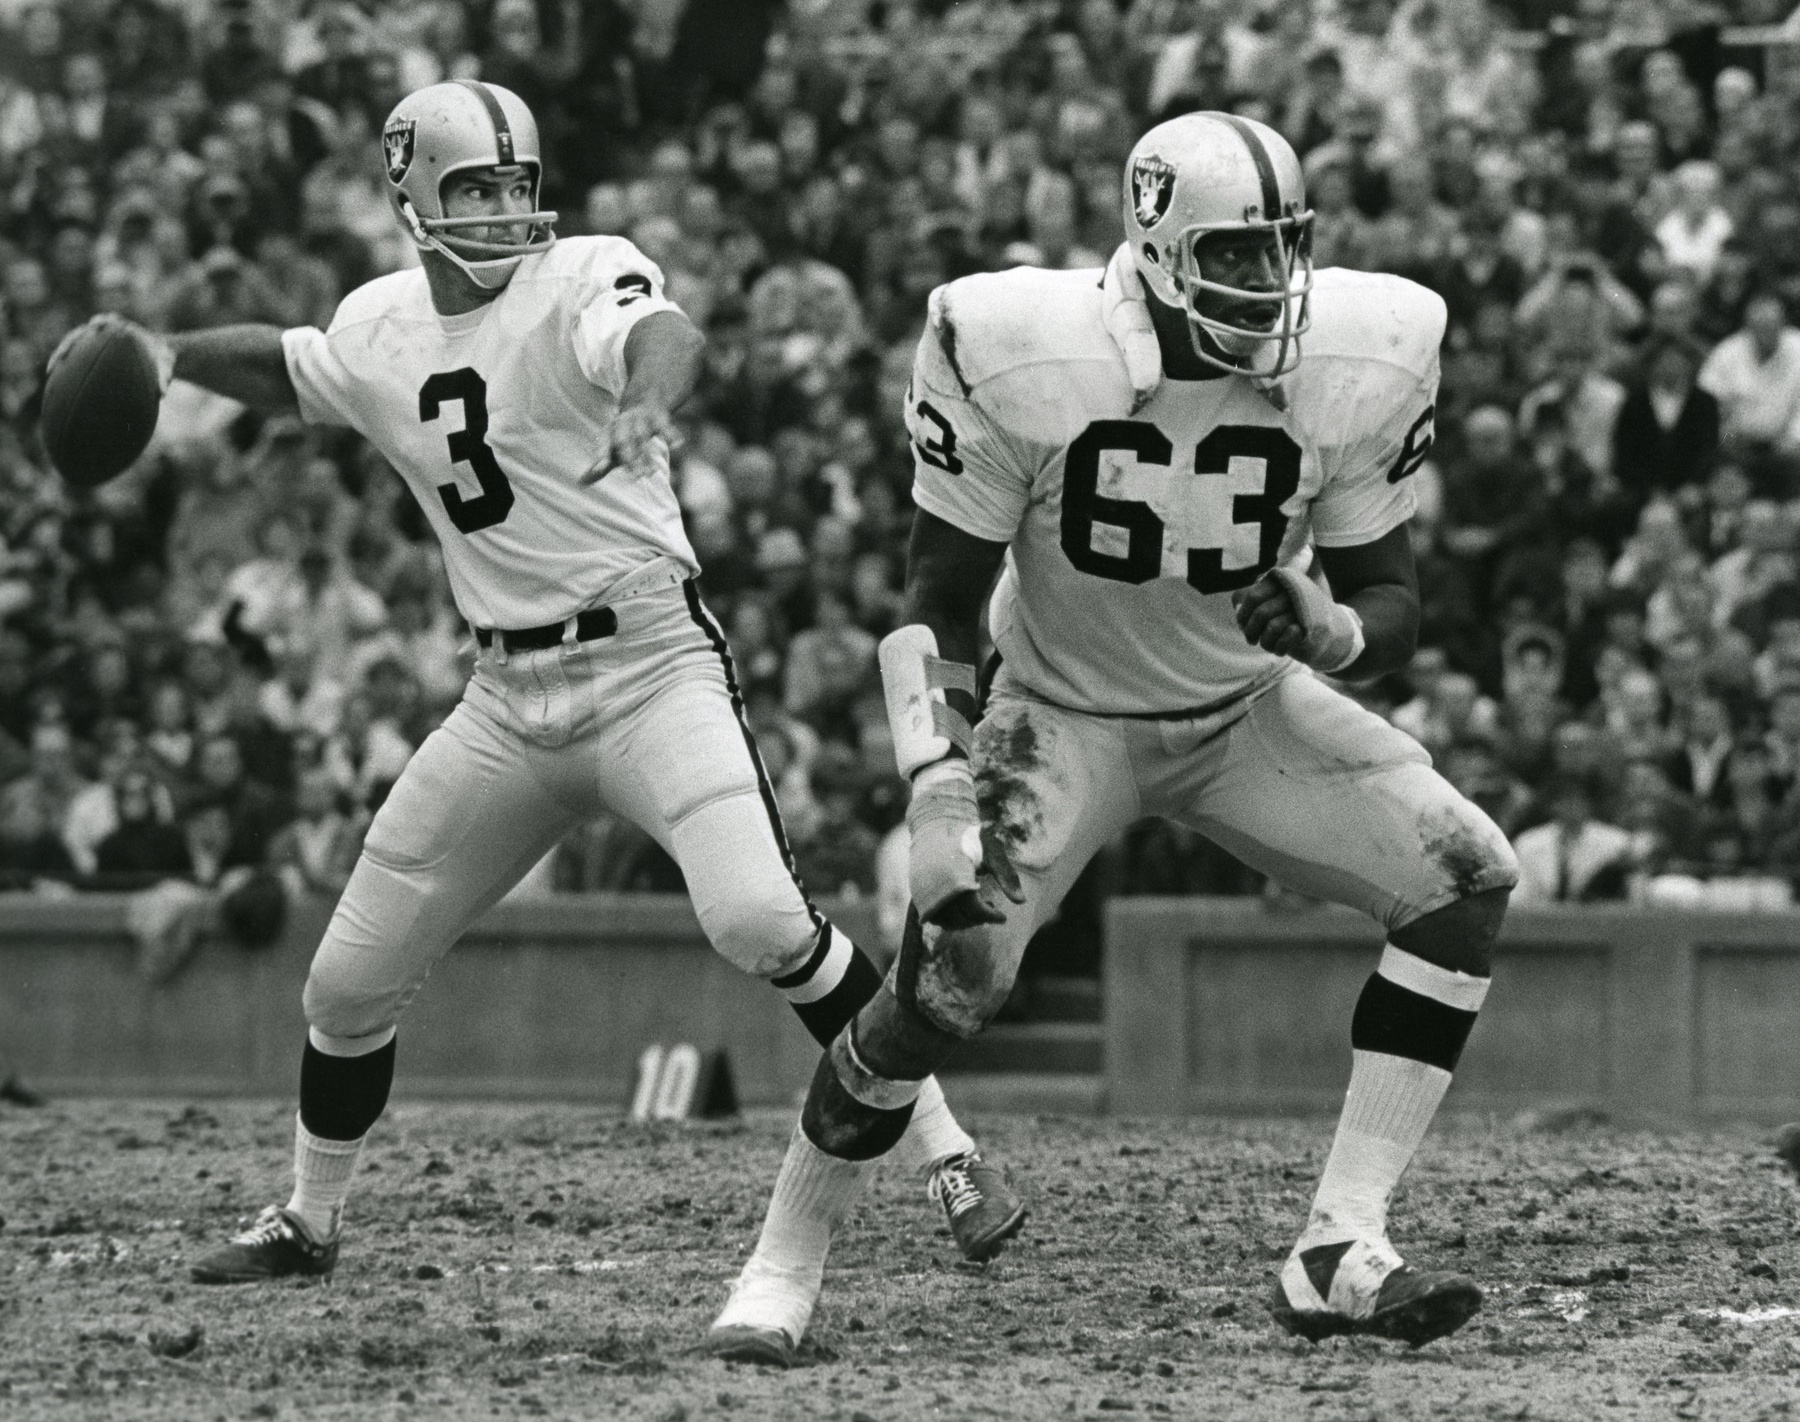 Raiders' Icon Gene Upshaw transformed the National Football League on and off the field.